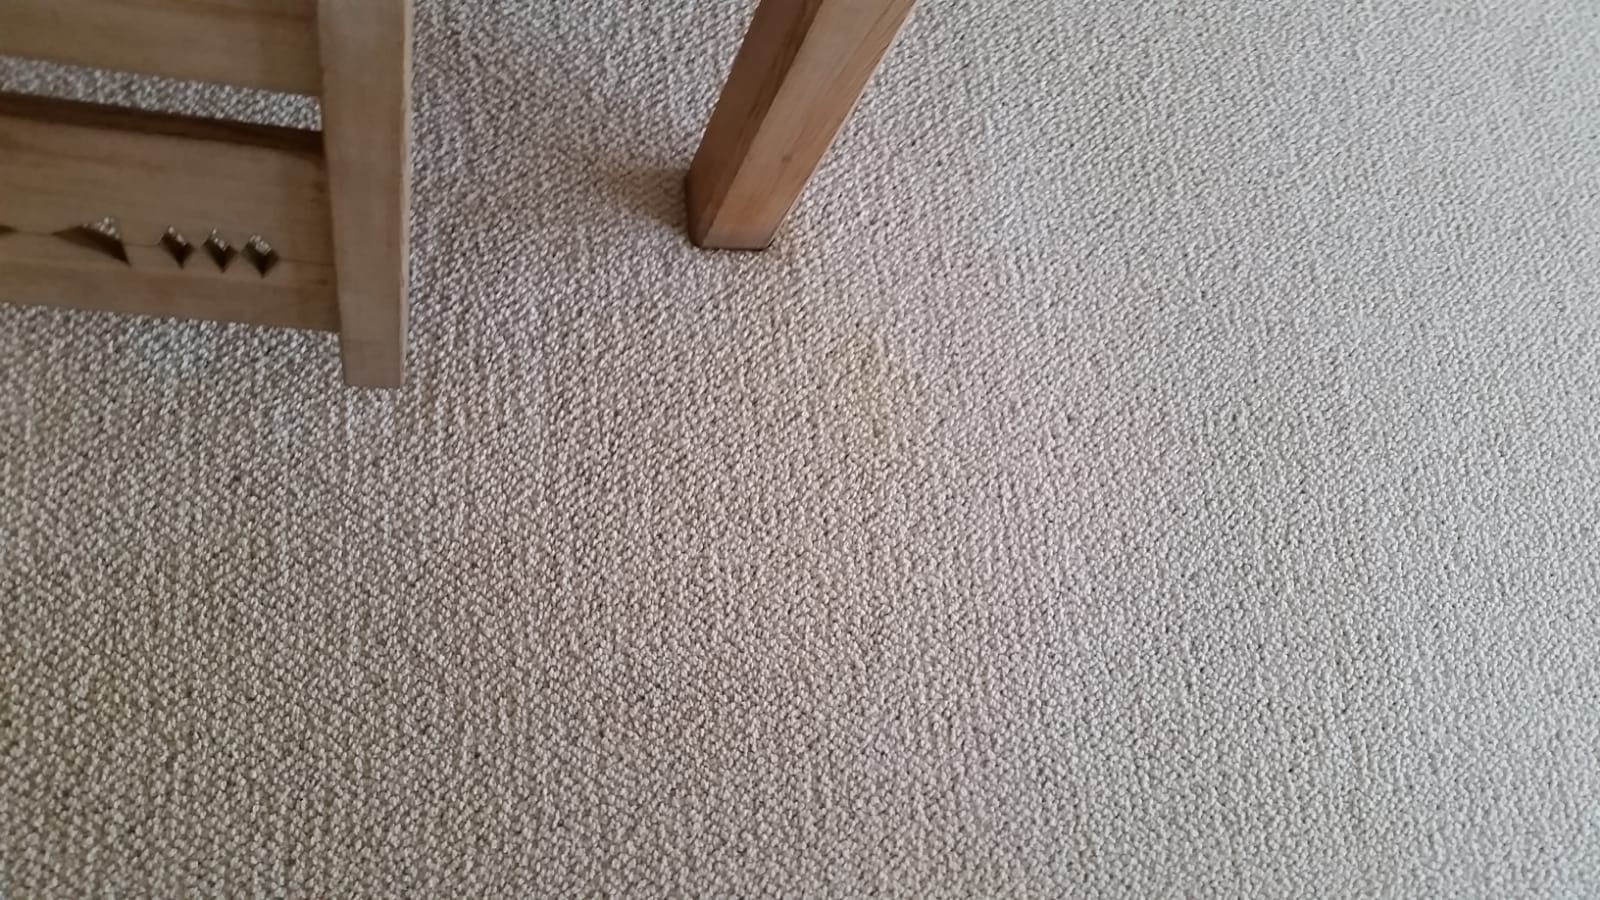 professional carpet cleaning in aliso viejo